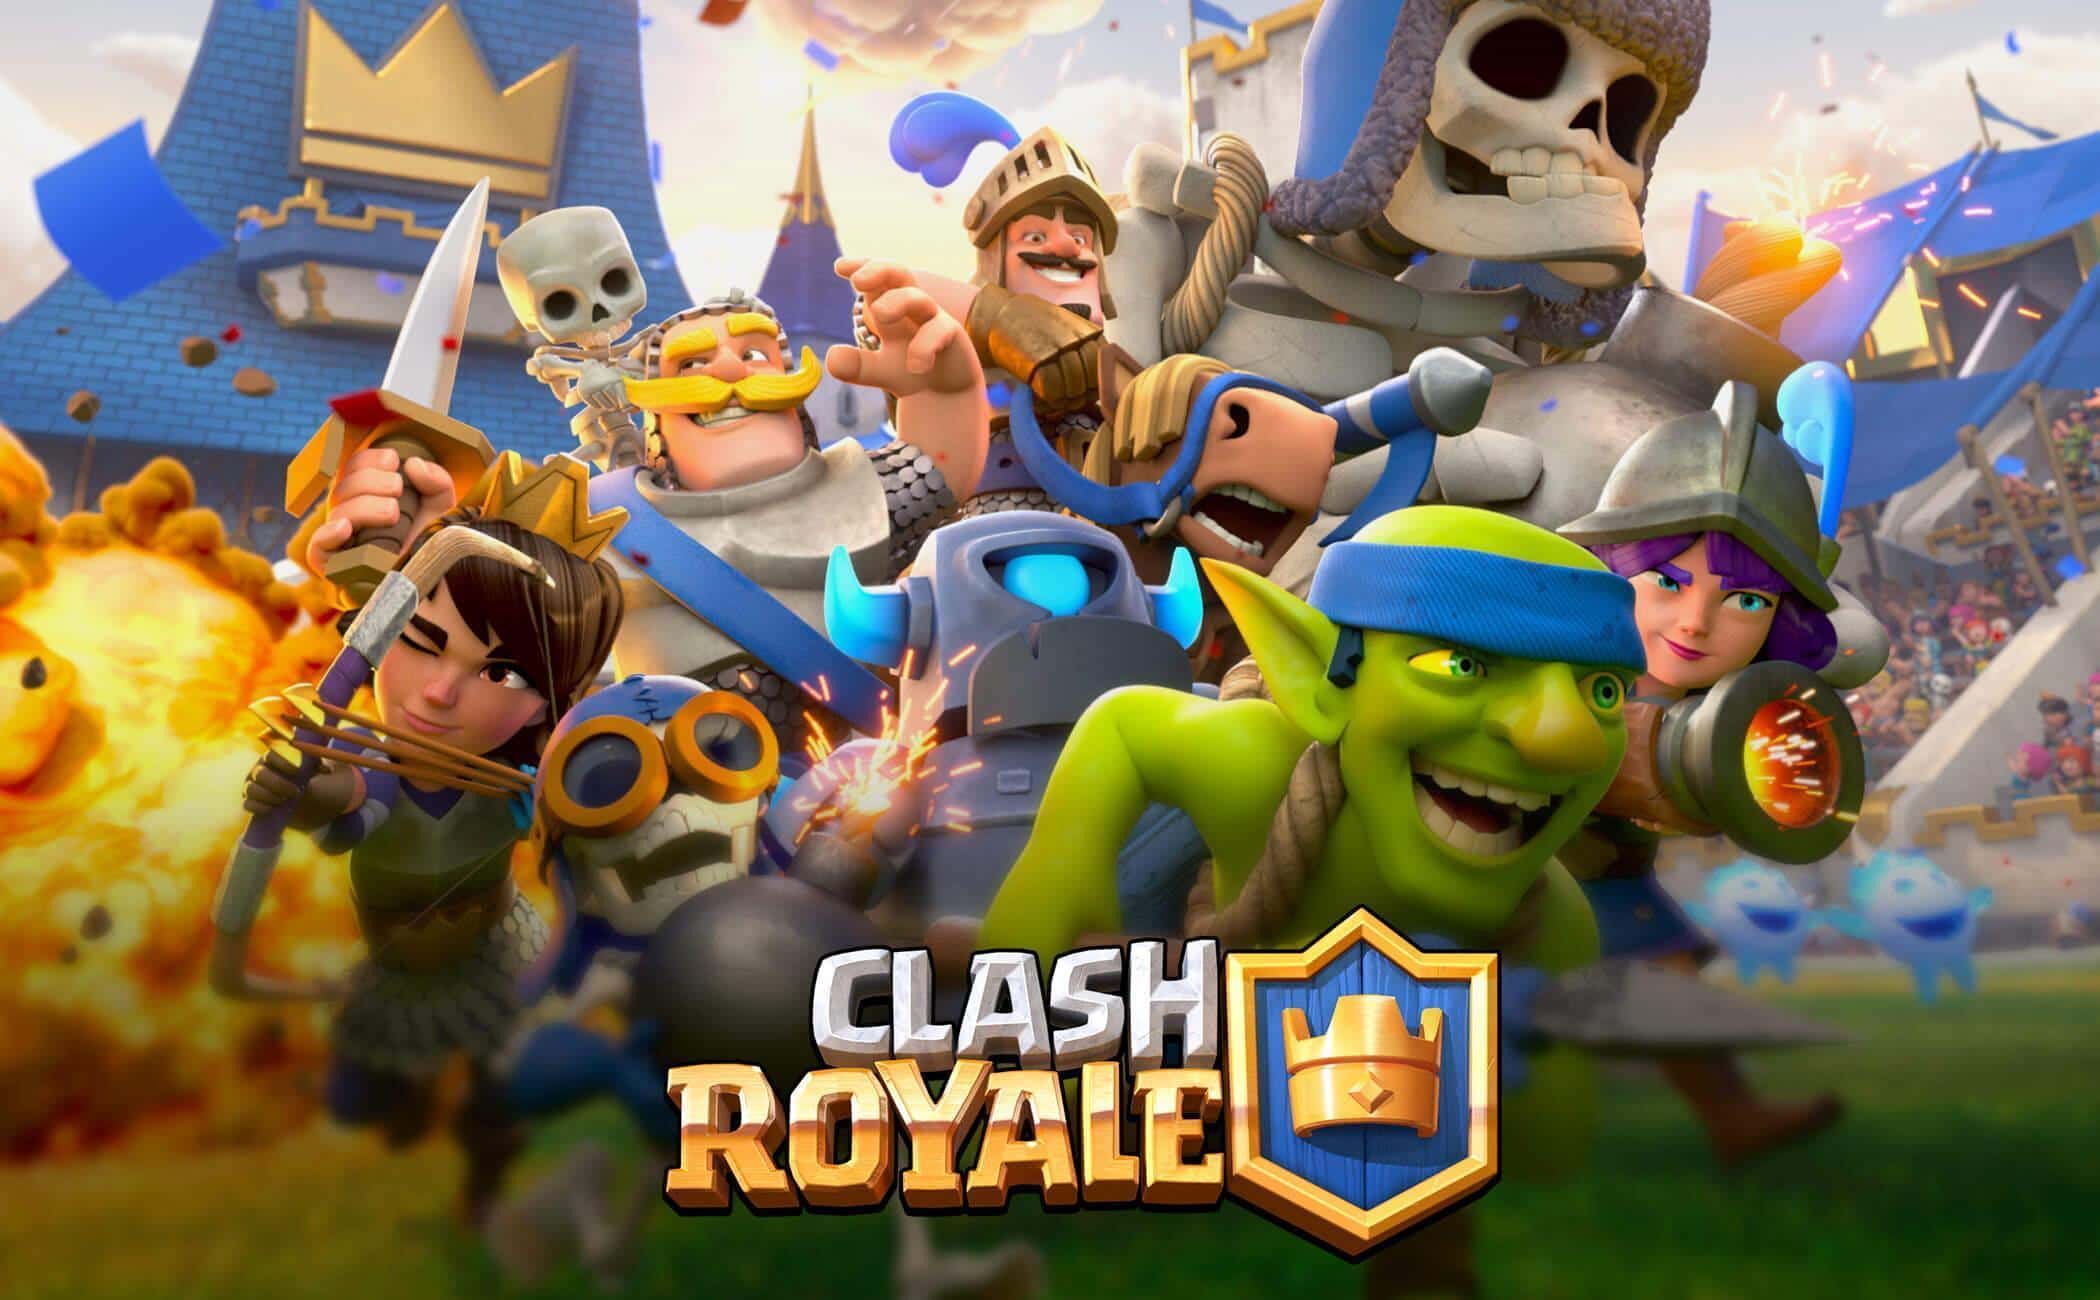 image for clash royale